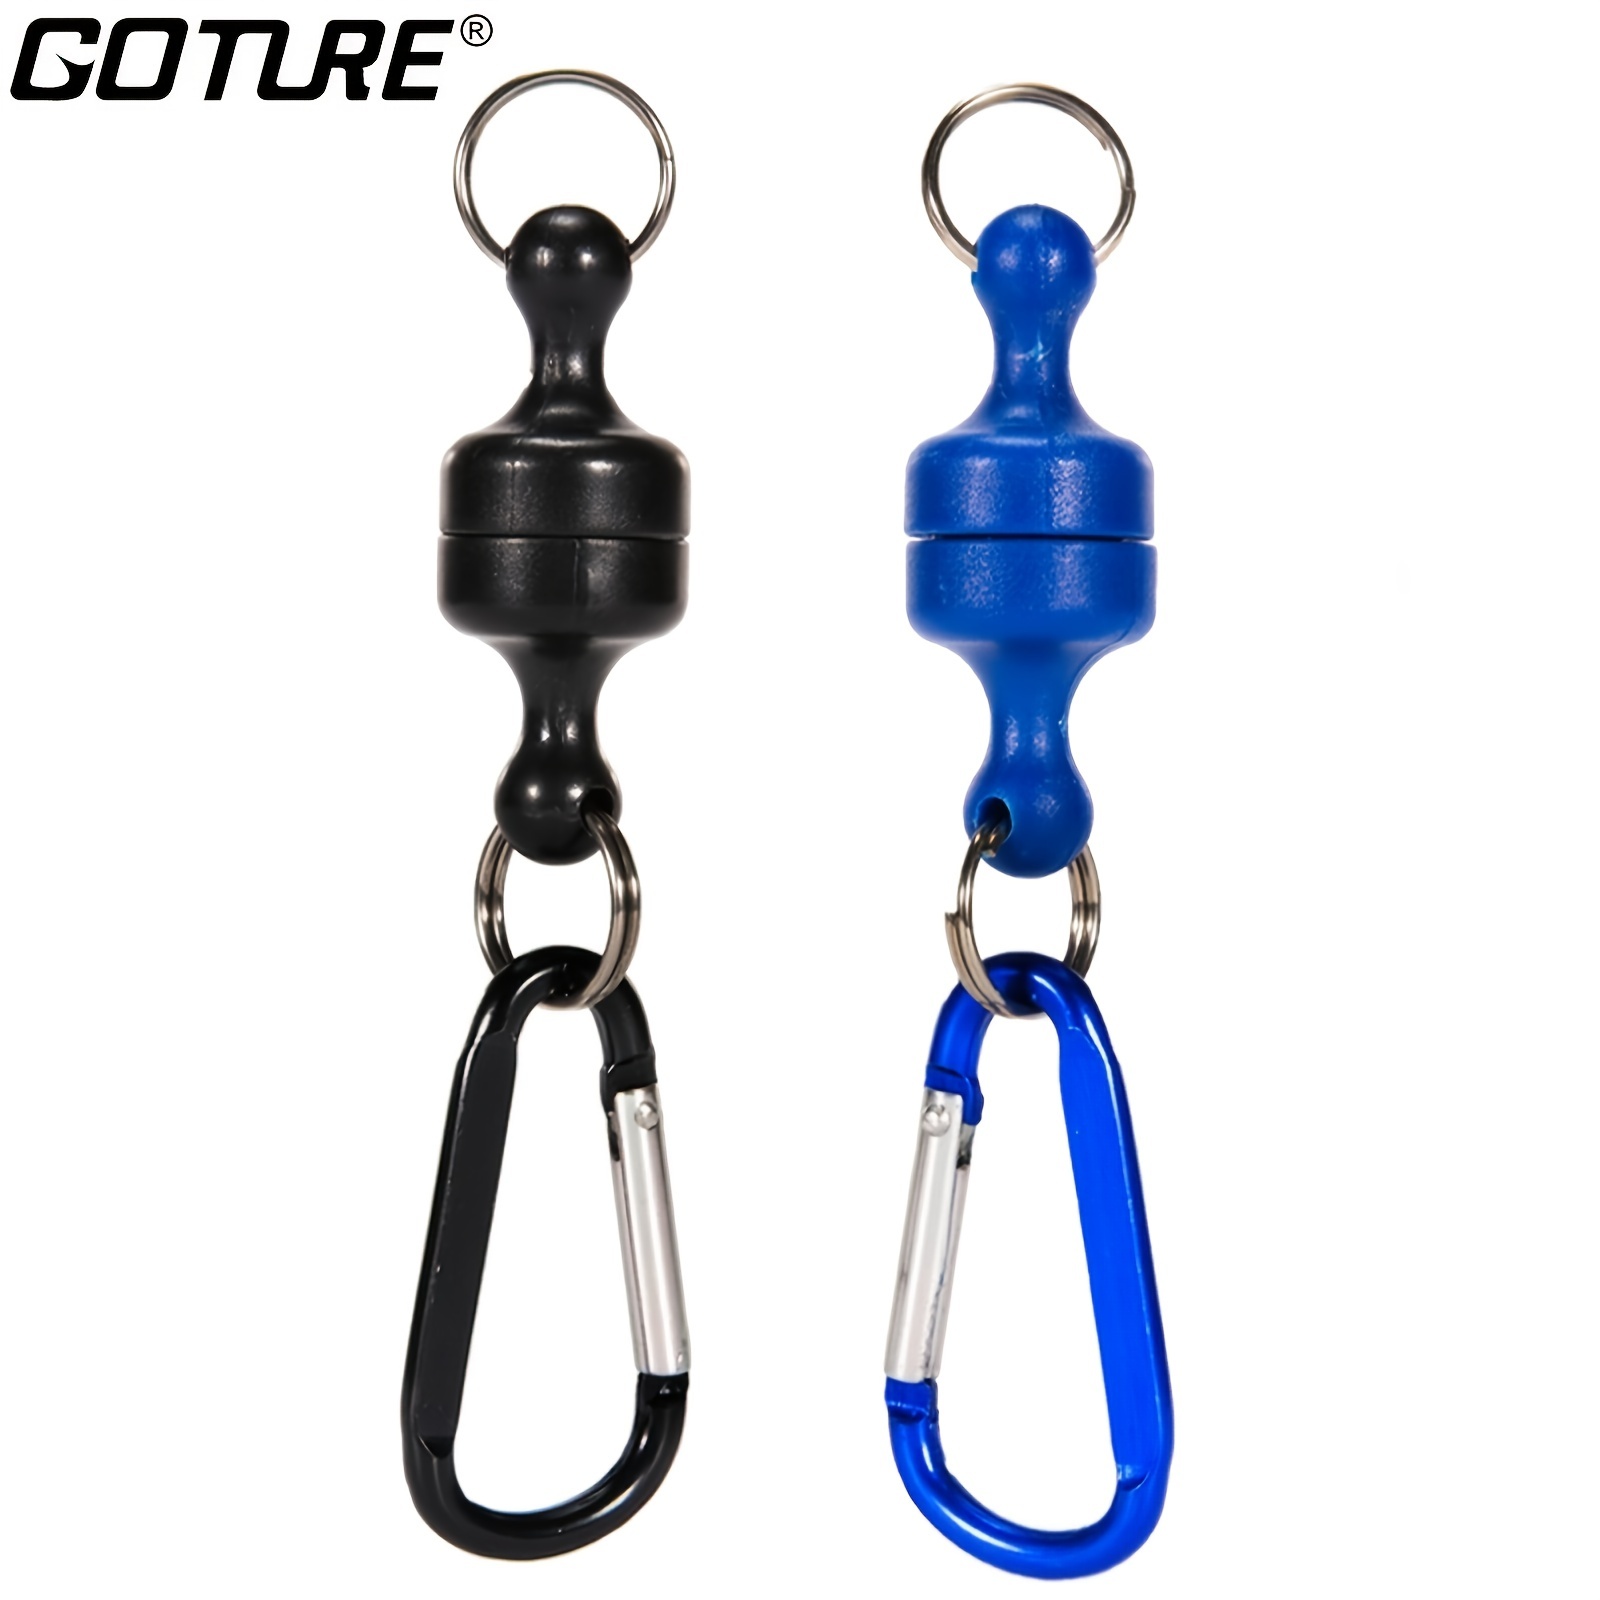 Fly Fishing Net Retractor with Carabiner Clip Fishing Accessories